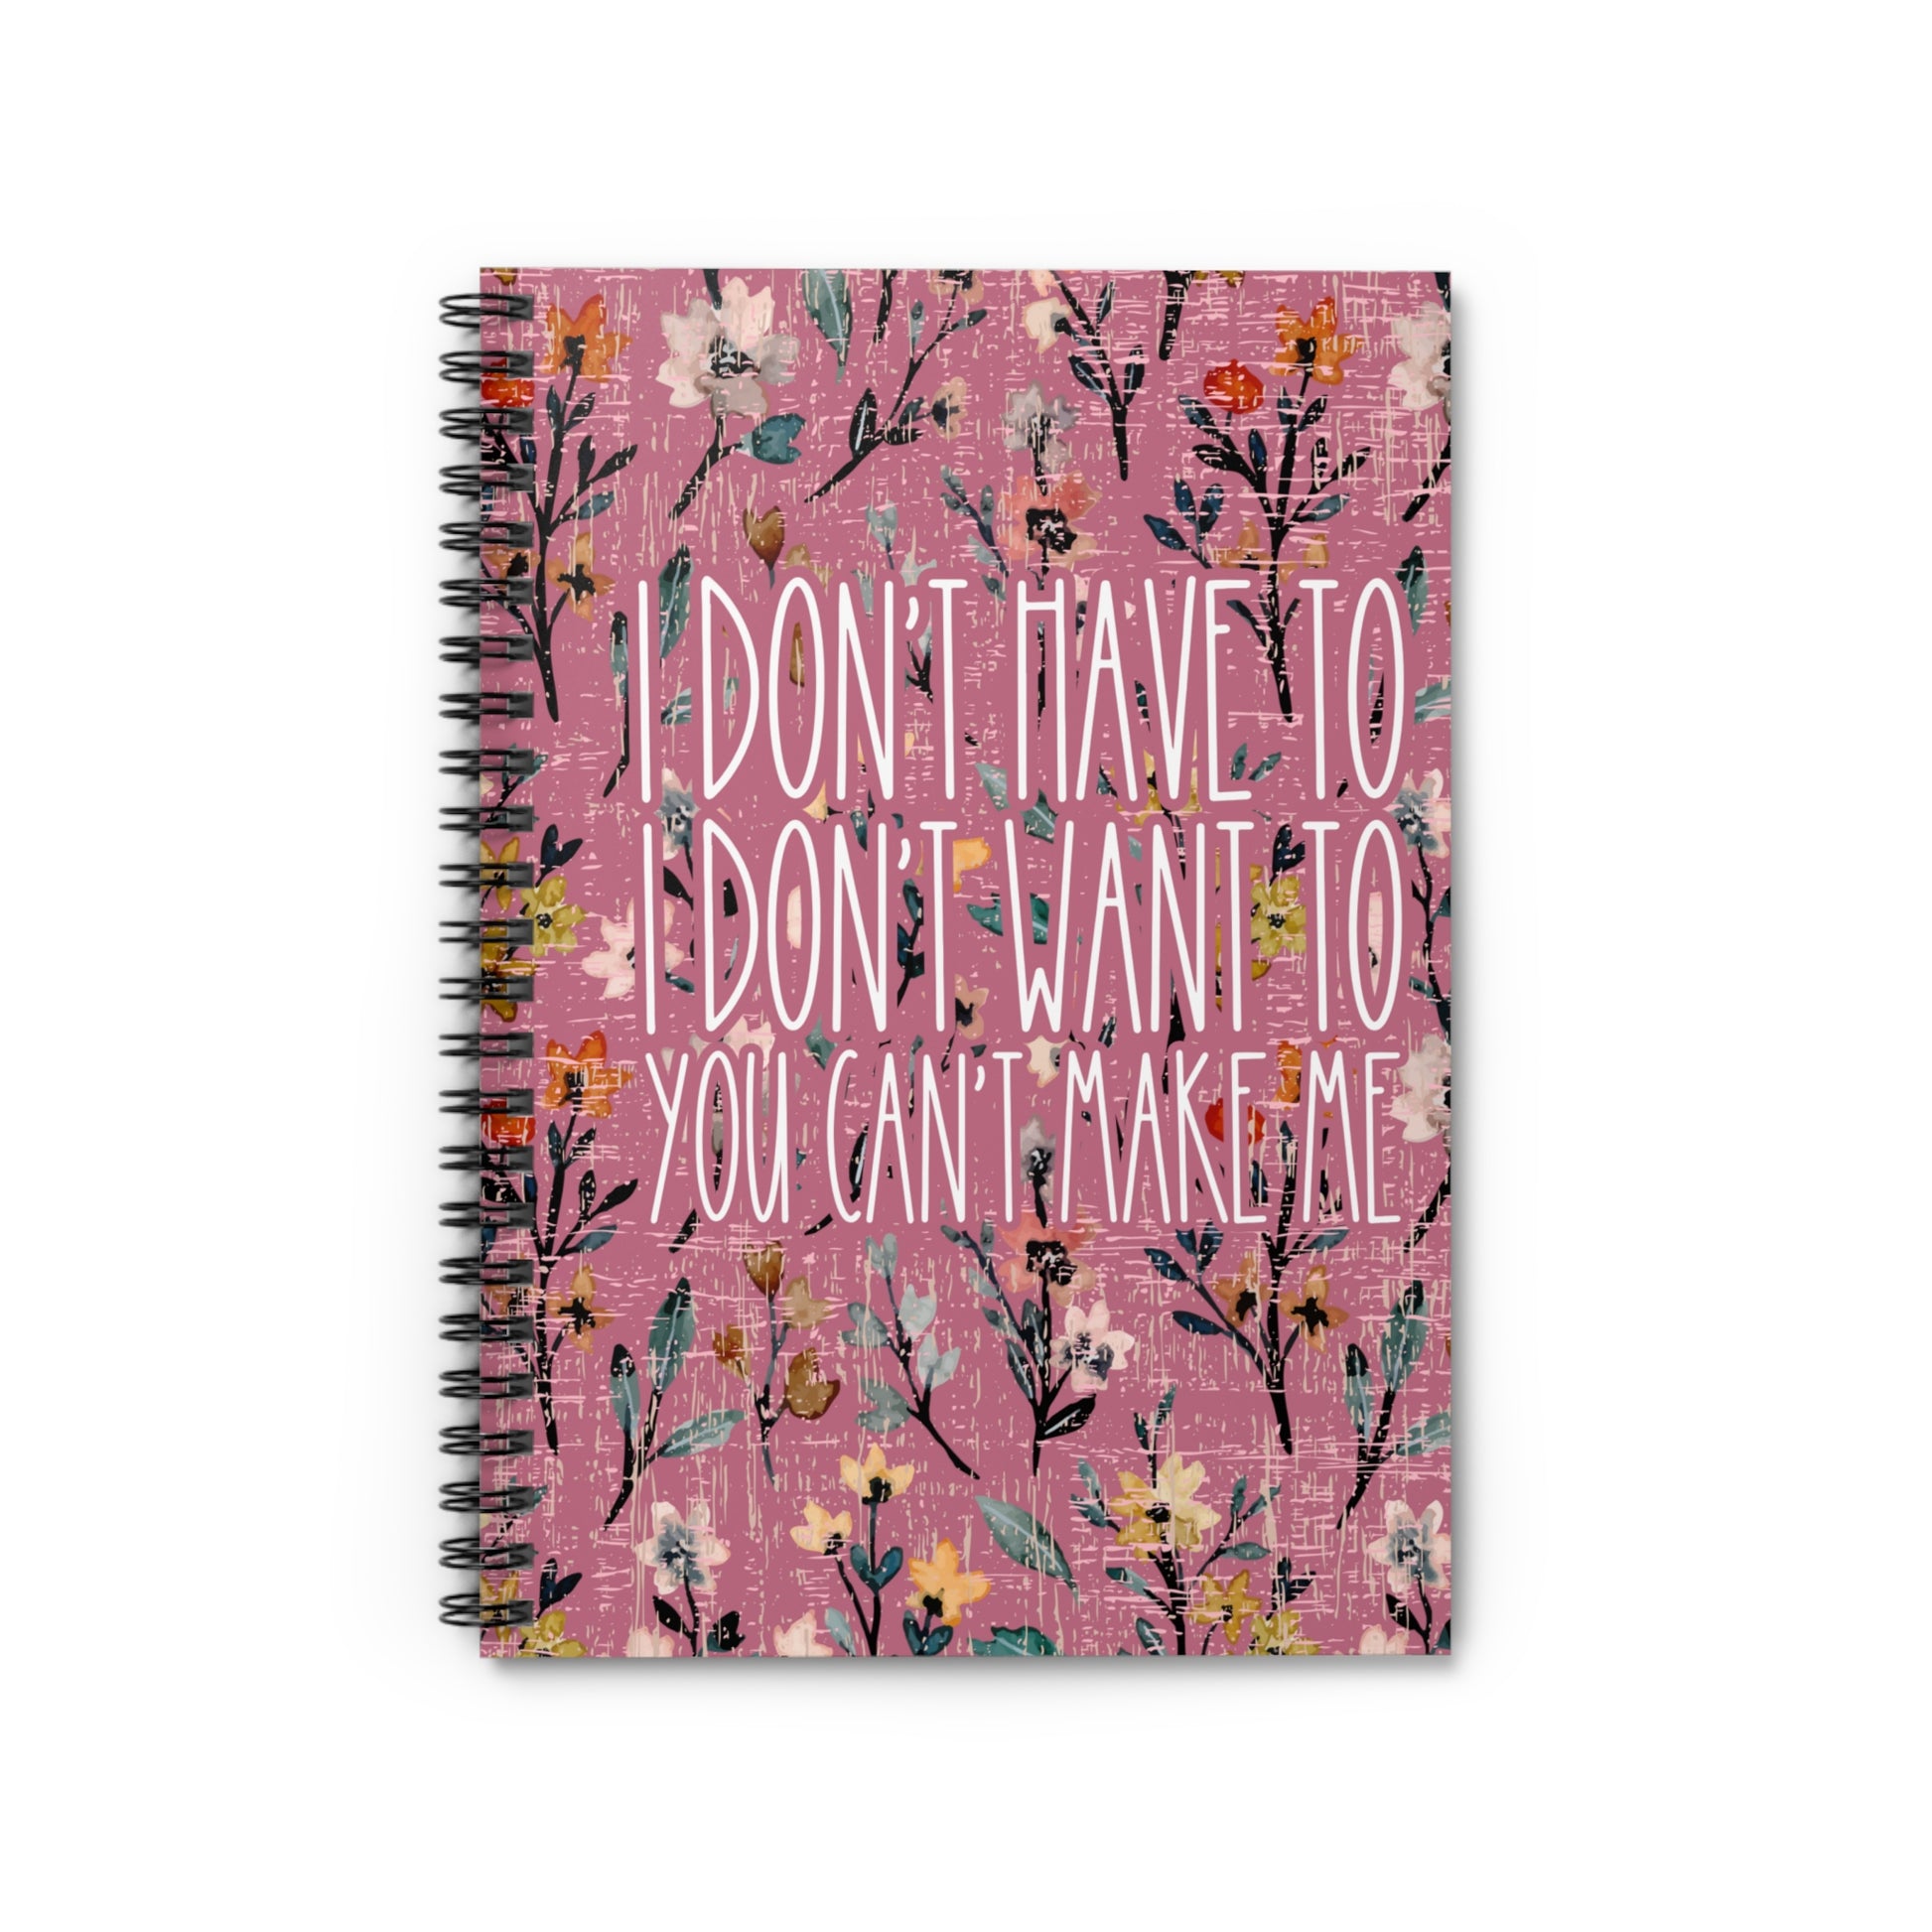 I Don't Have To, I Don't Want To, You Can't Make Me" Empowerment Spiral Notebook - Express Yourself with Style and Independence! - Eddy and Rita